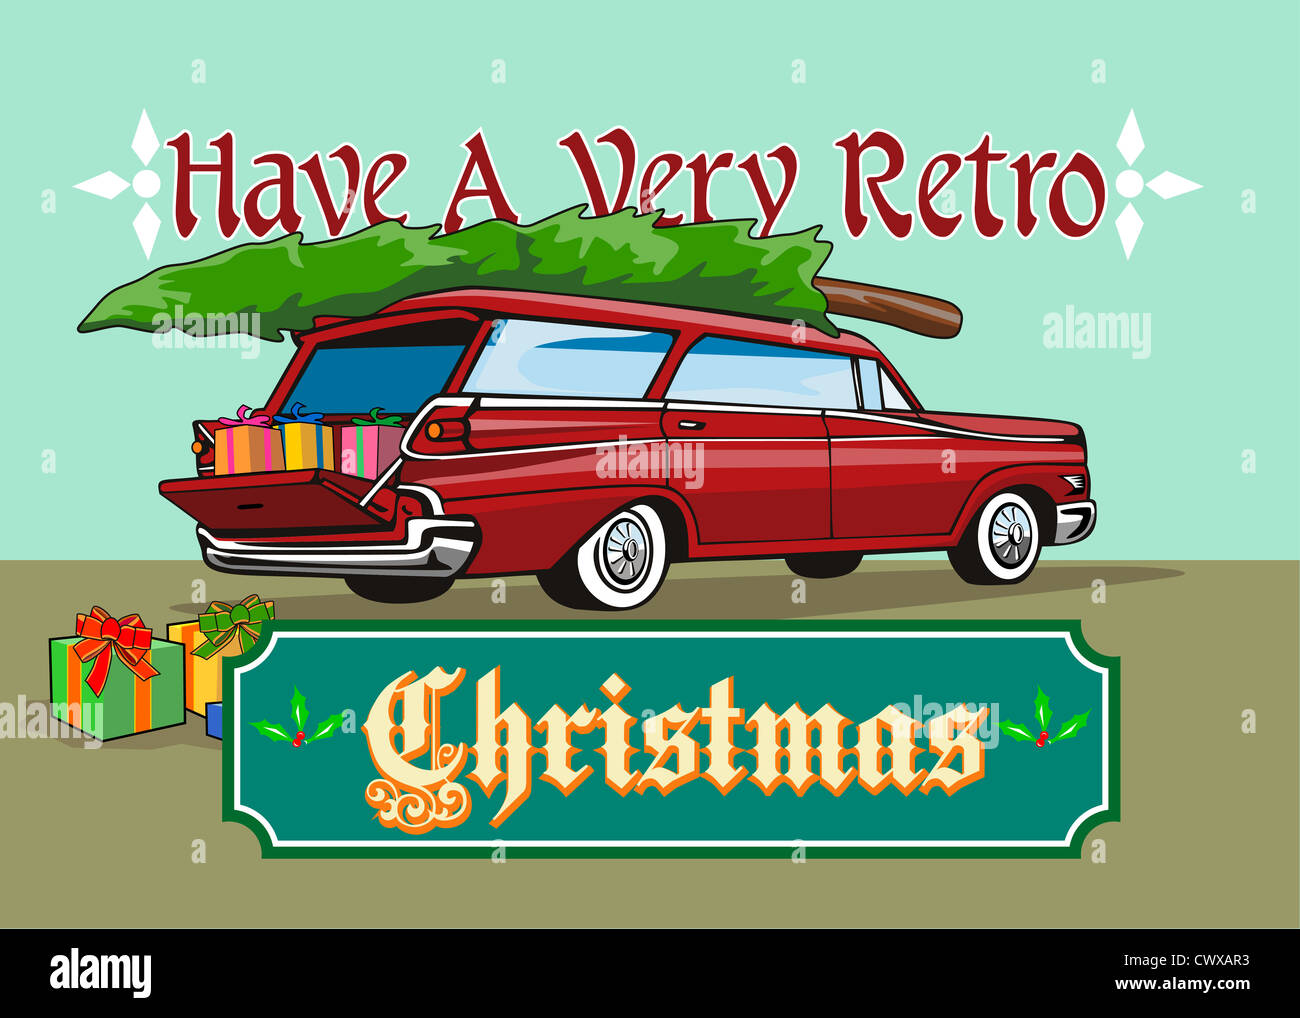 Greeting card poster illustration showing a christmas tree on top of vintage station wagon automobile with gifts presents Stock Photo